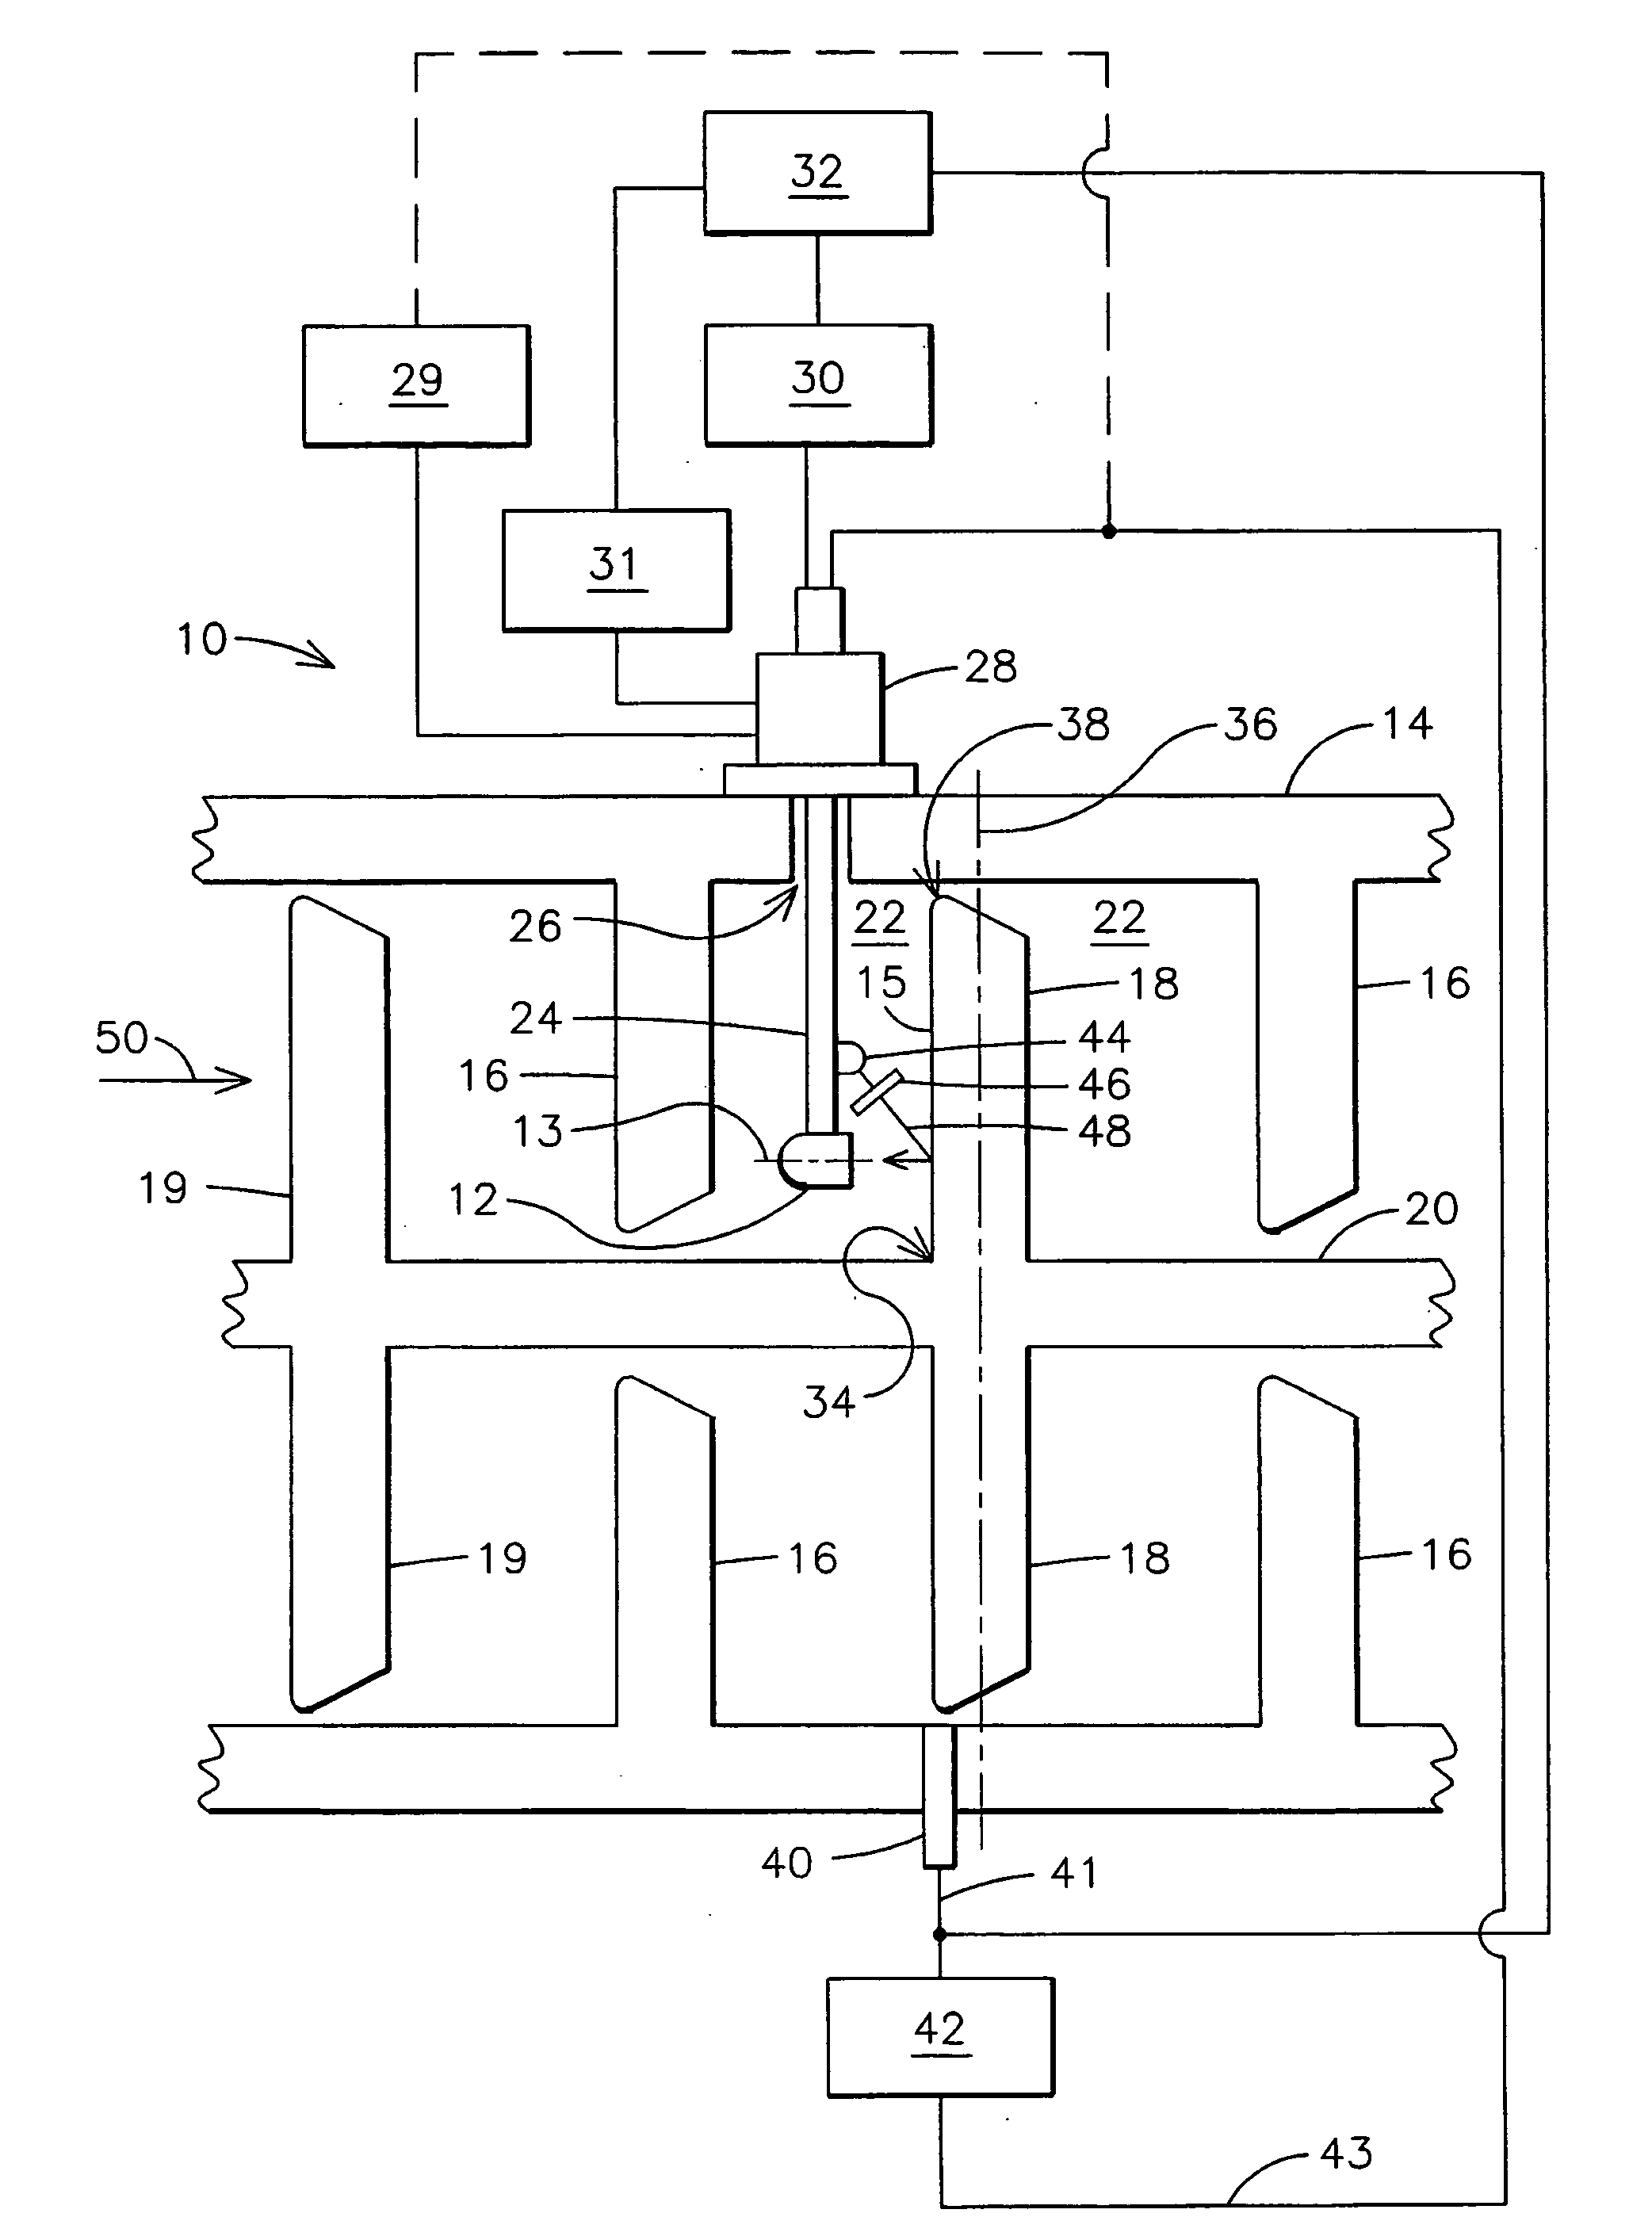 In situ combustion turbine engine airfoil inspection